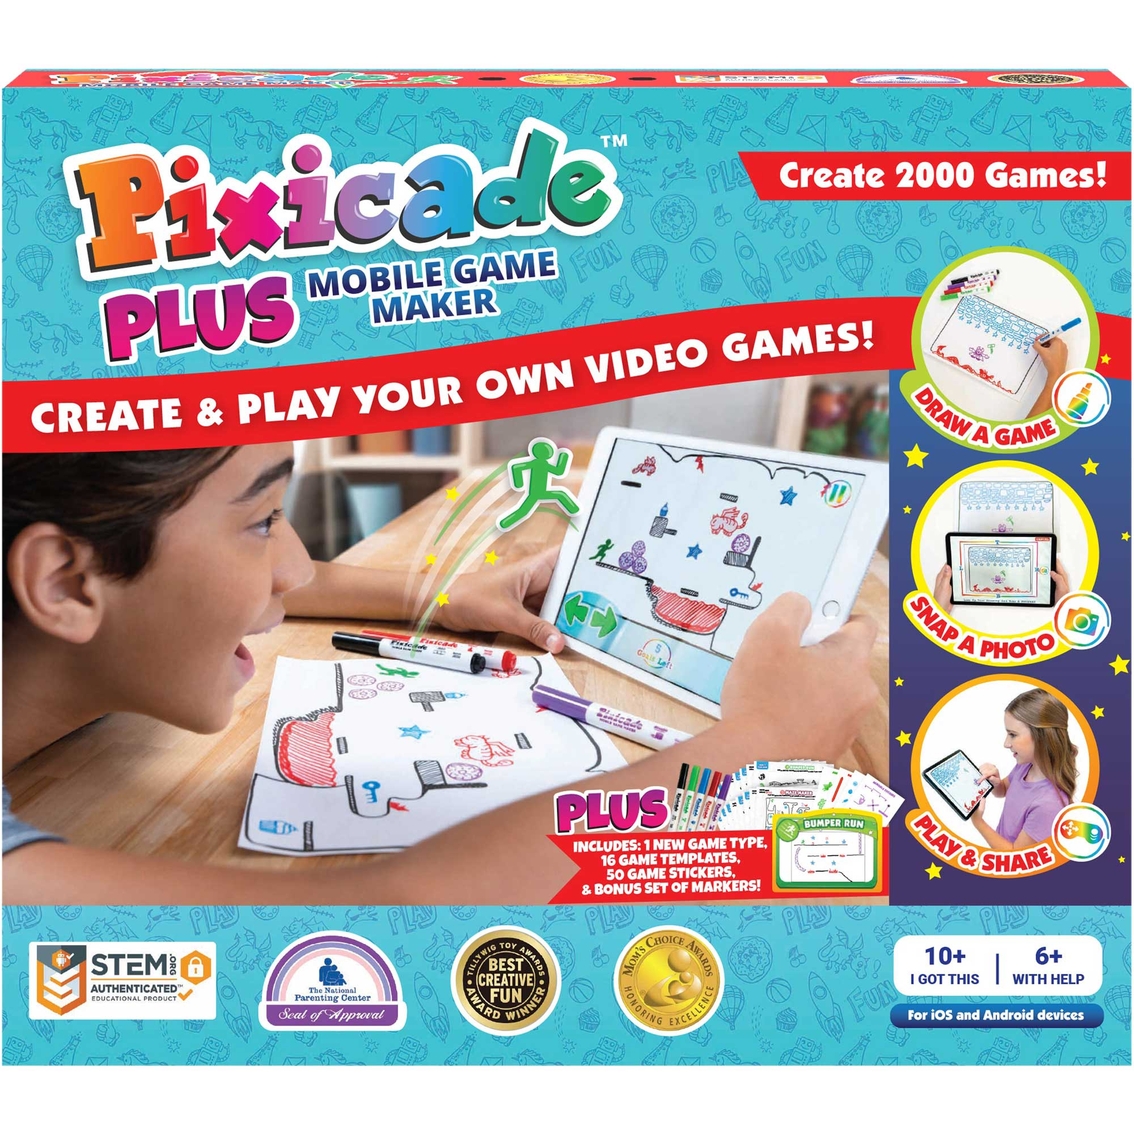 Pixicade Video Game Maker, STEM Kit to Create & Play Your Own Video Games